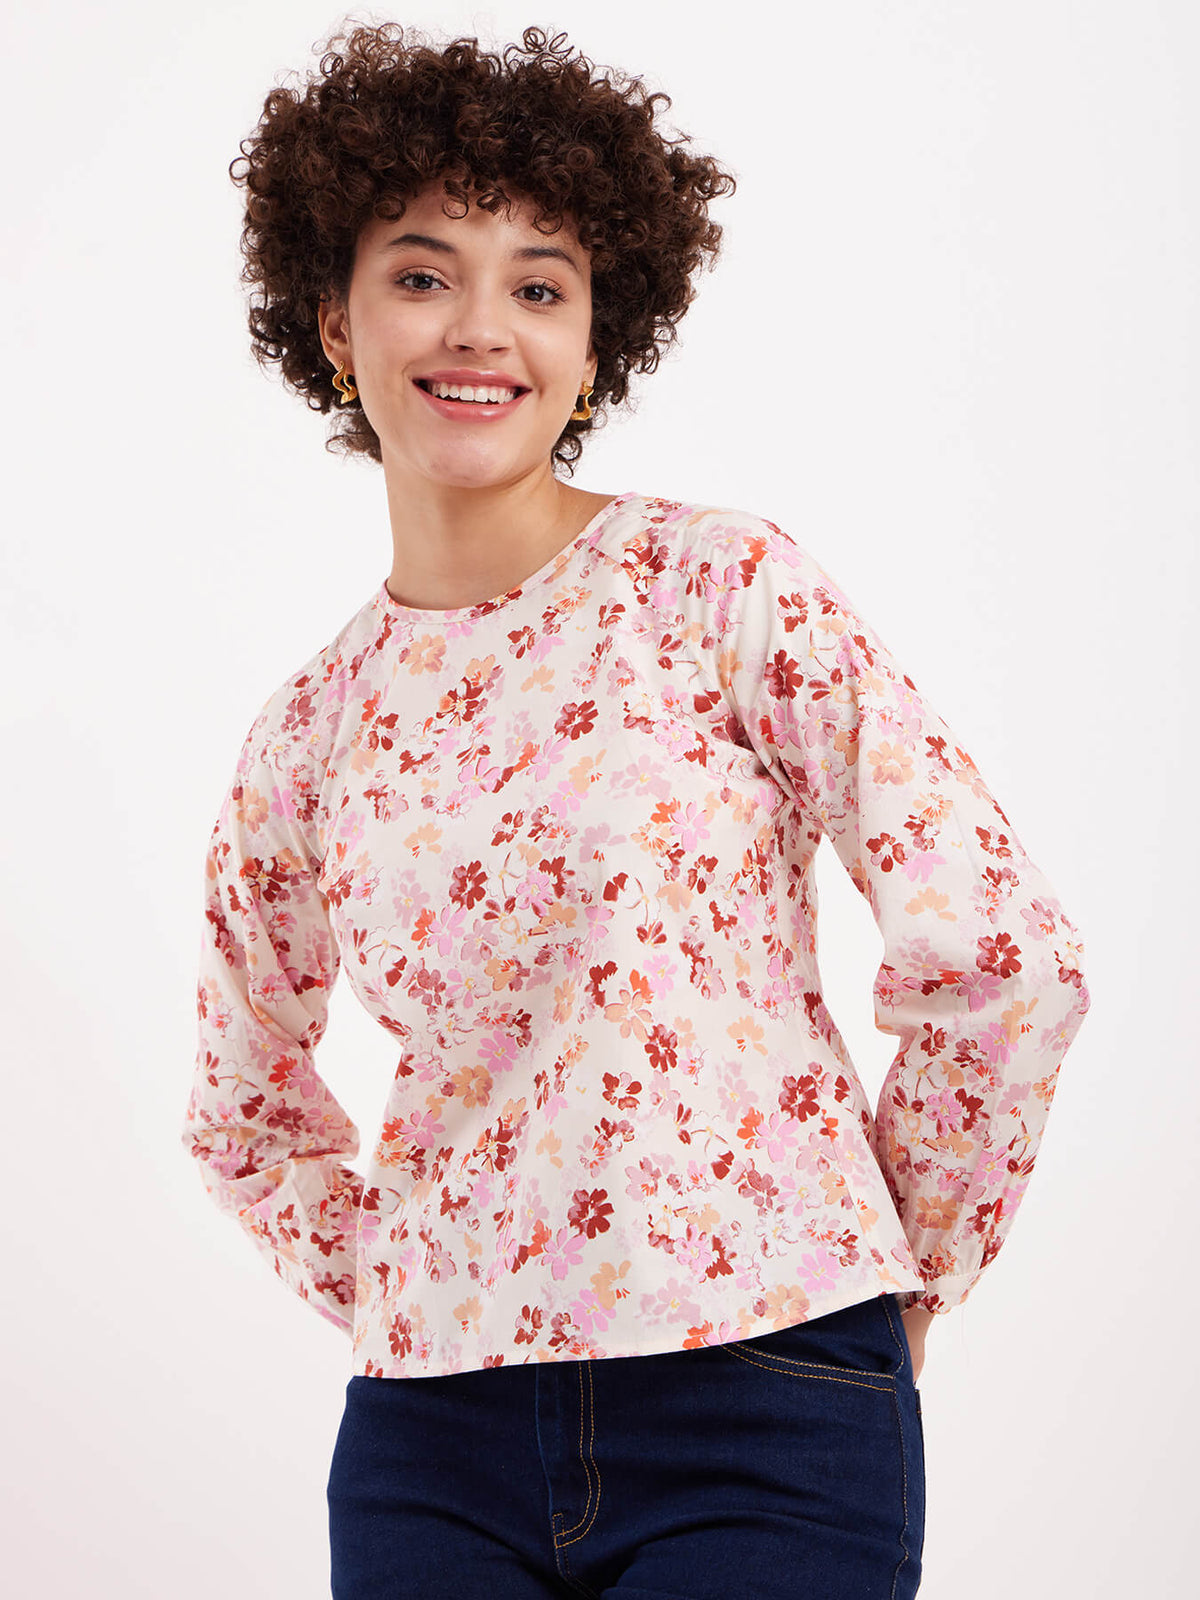 Cotton Floral Print Round Neck Top - White And Maroon